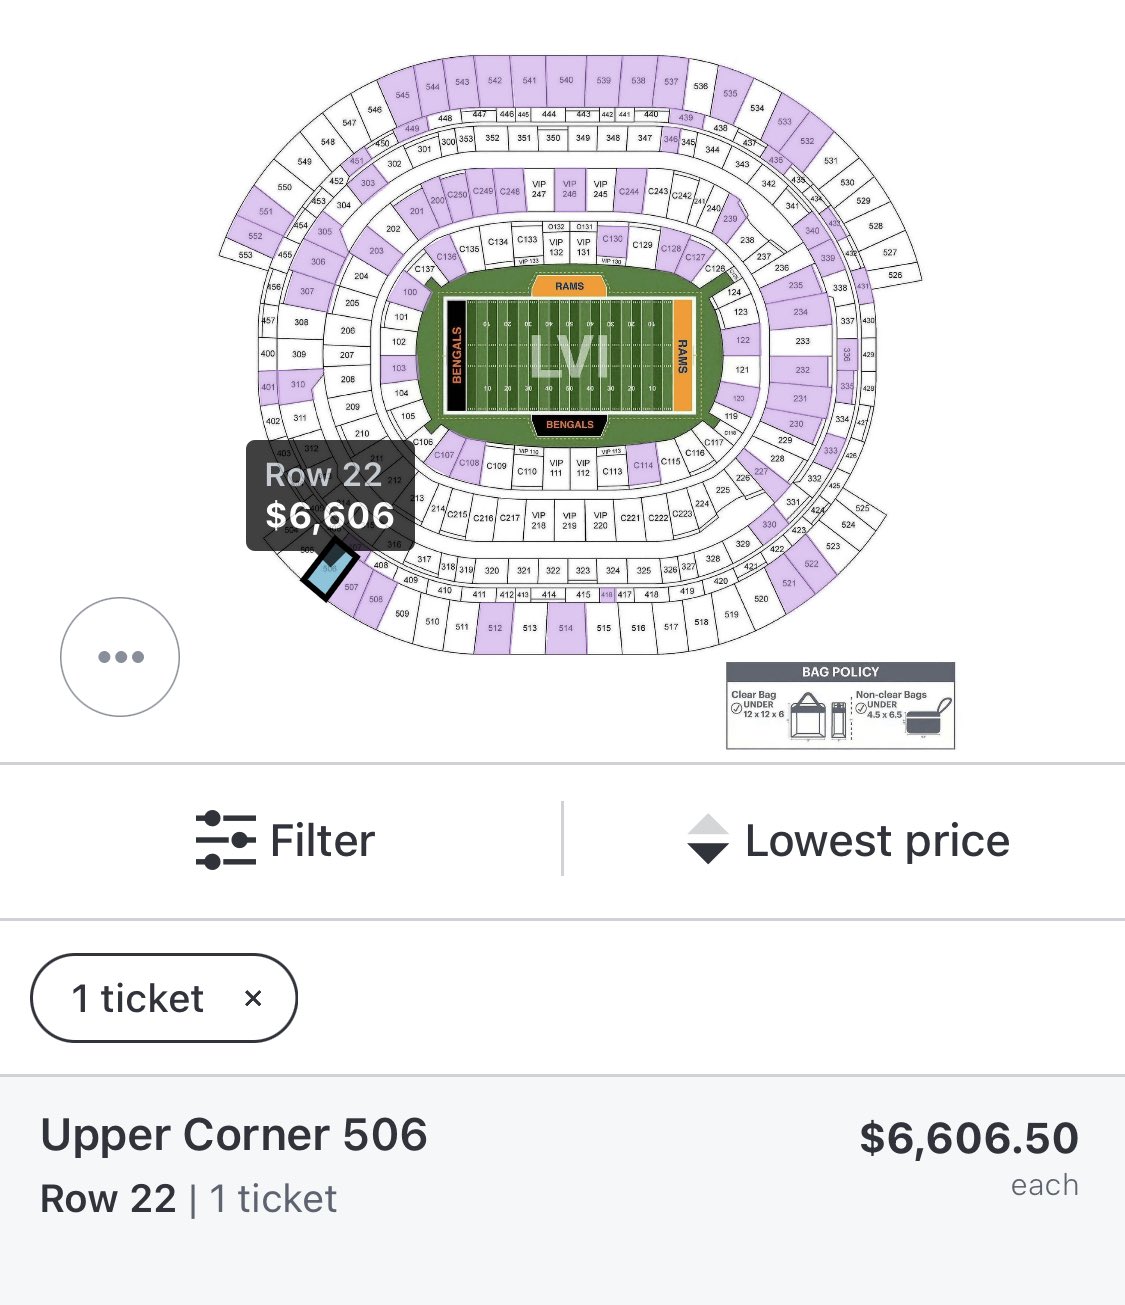 ticket for super bowl 2022 price